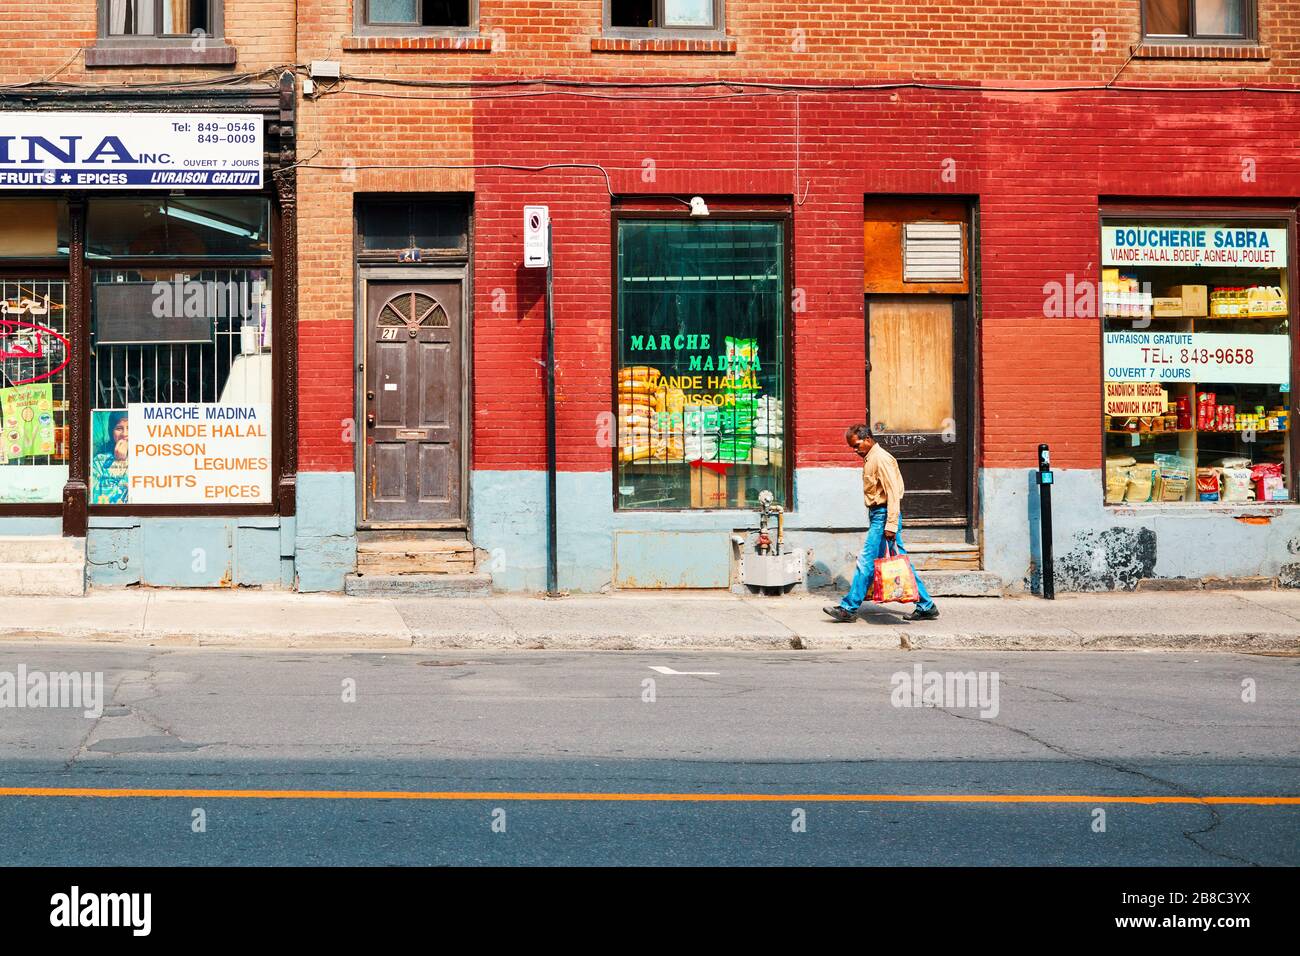 June, 2018 - Montreal, Canada: Indian or Pakistani man carrying shopping bags walks on Ontario street with historical buildings and shops in Montreal, Stock Photo